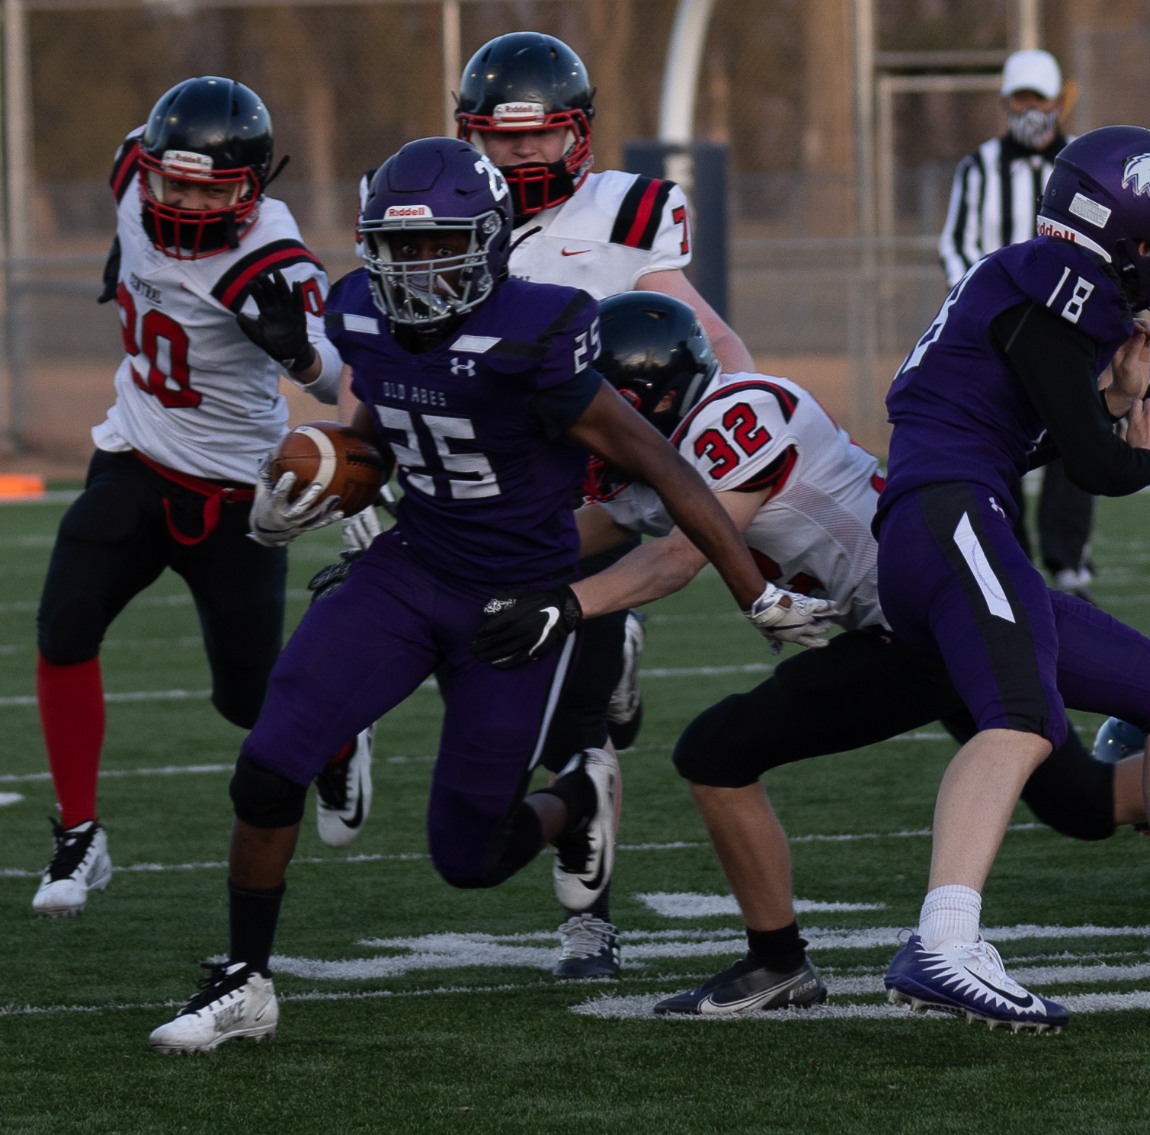 Eau-Claire-Memorial-JV-Football-LaCrosse-Central-at-Home-3-29-21-1395